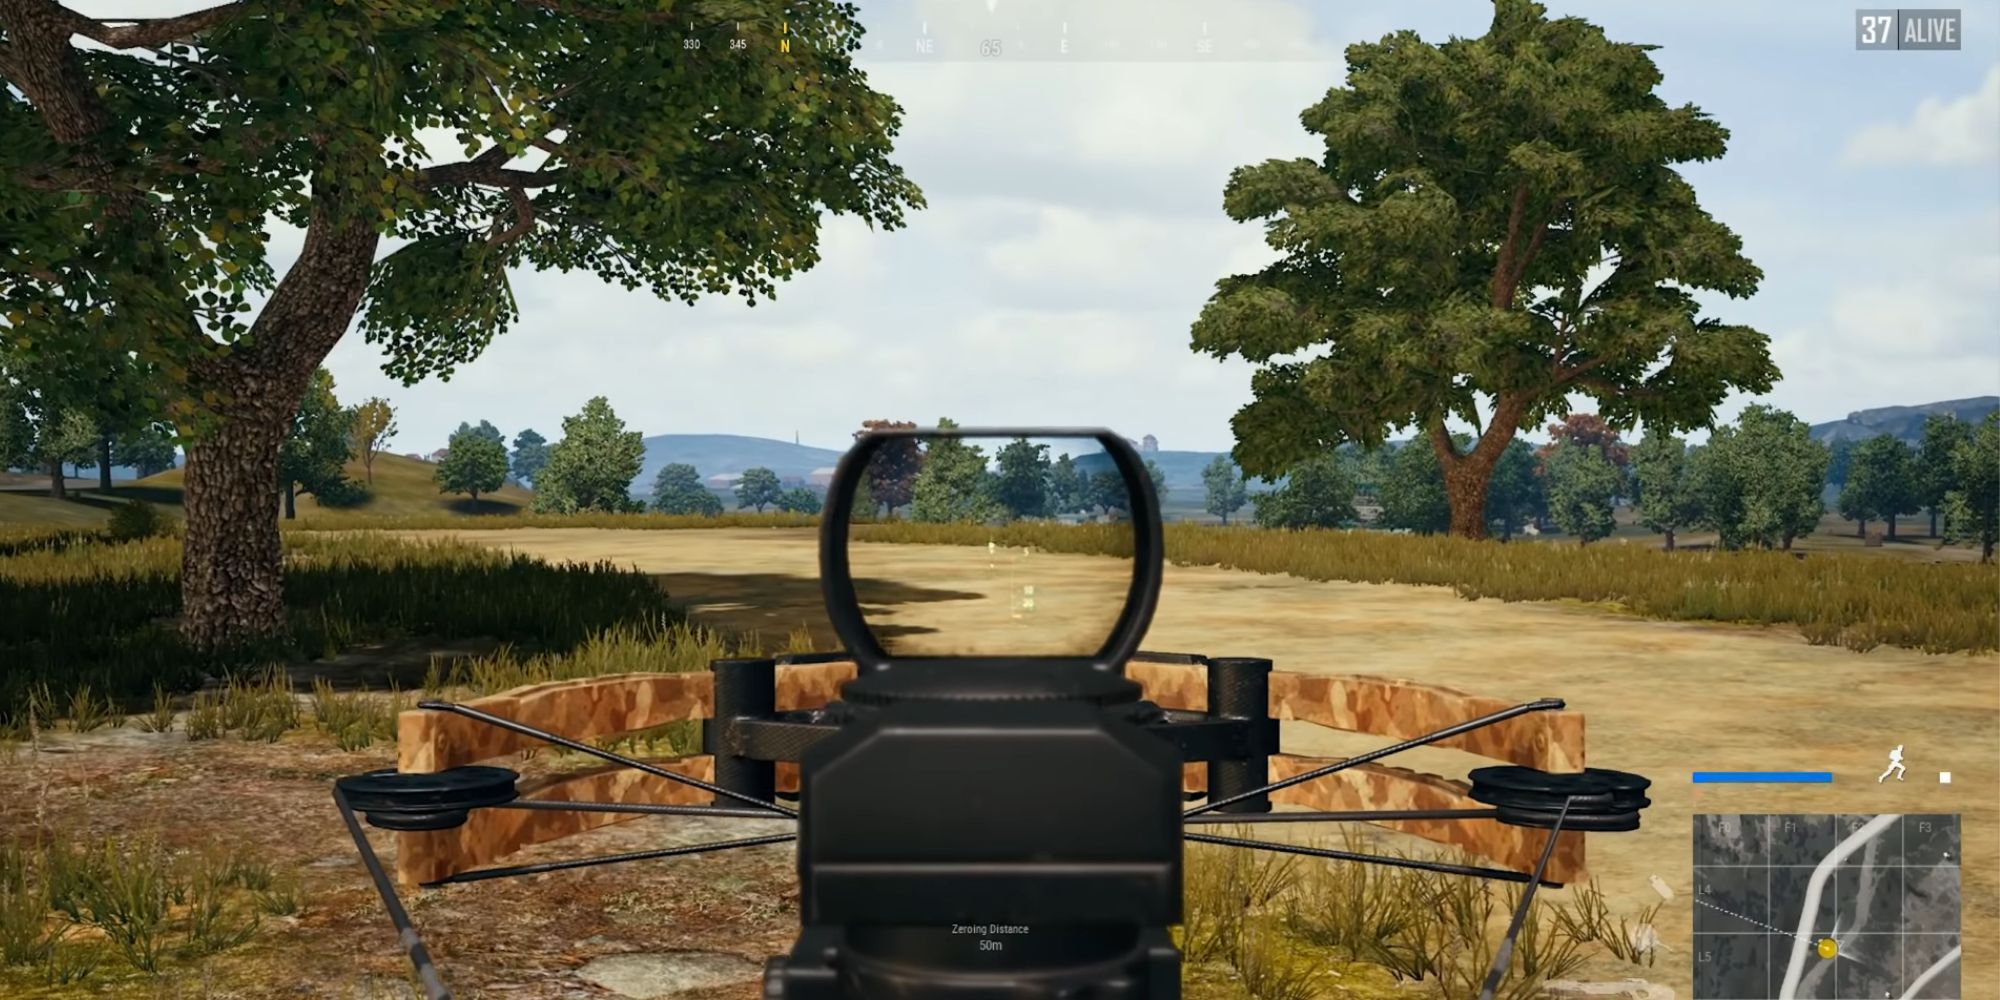 Aiming down the crossbow sights